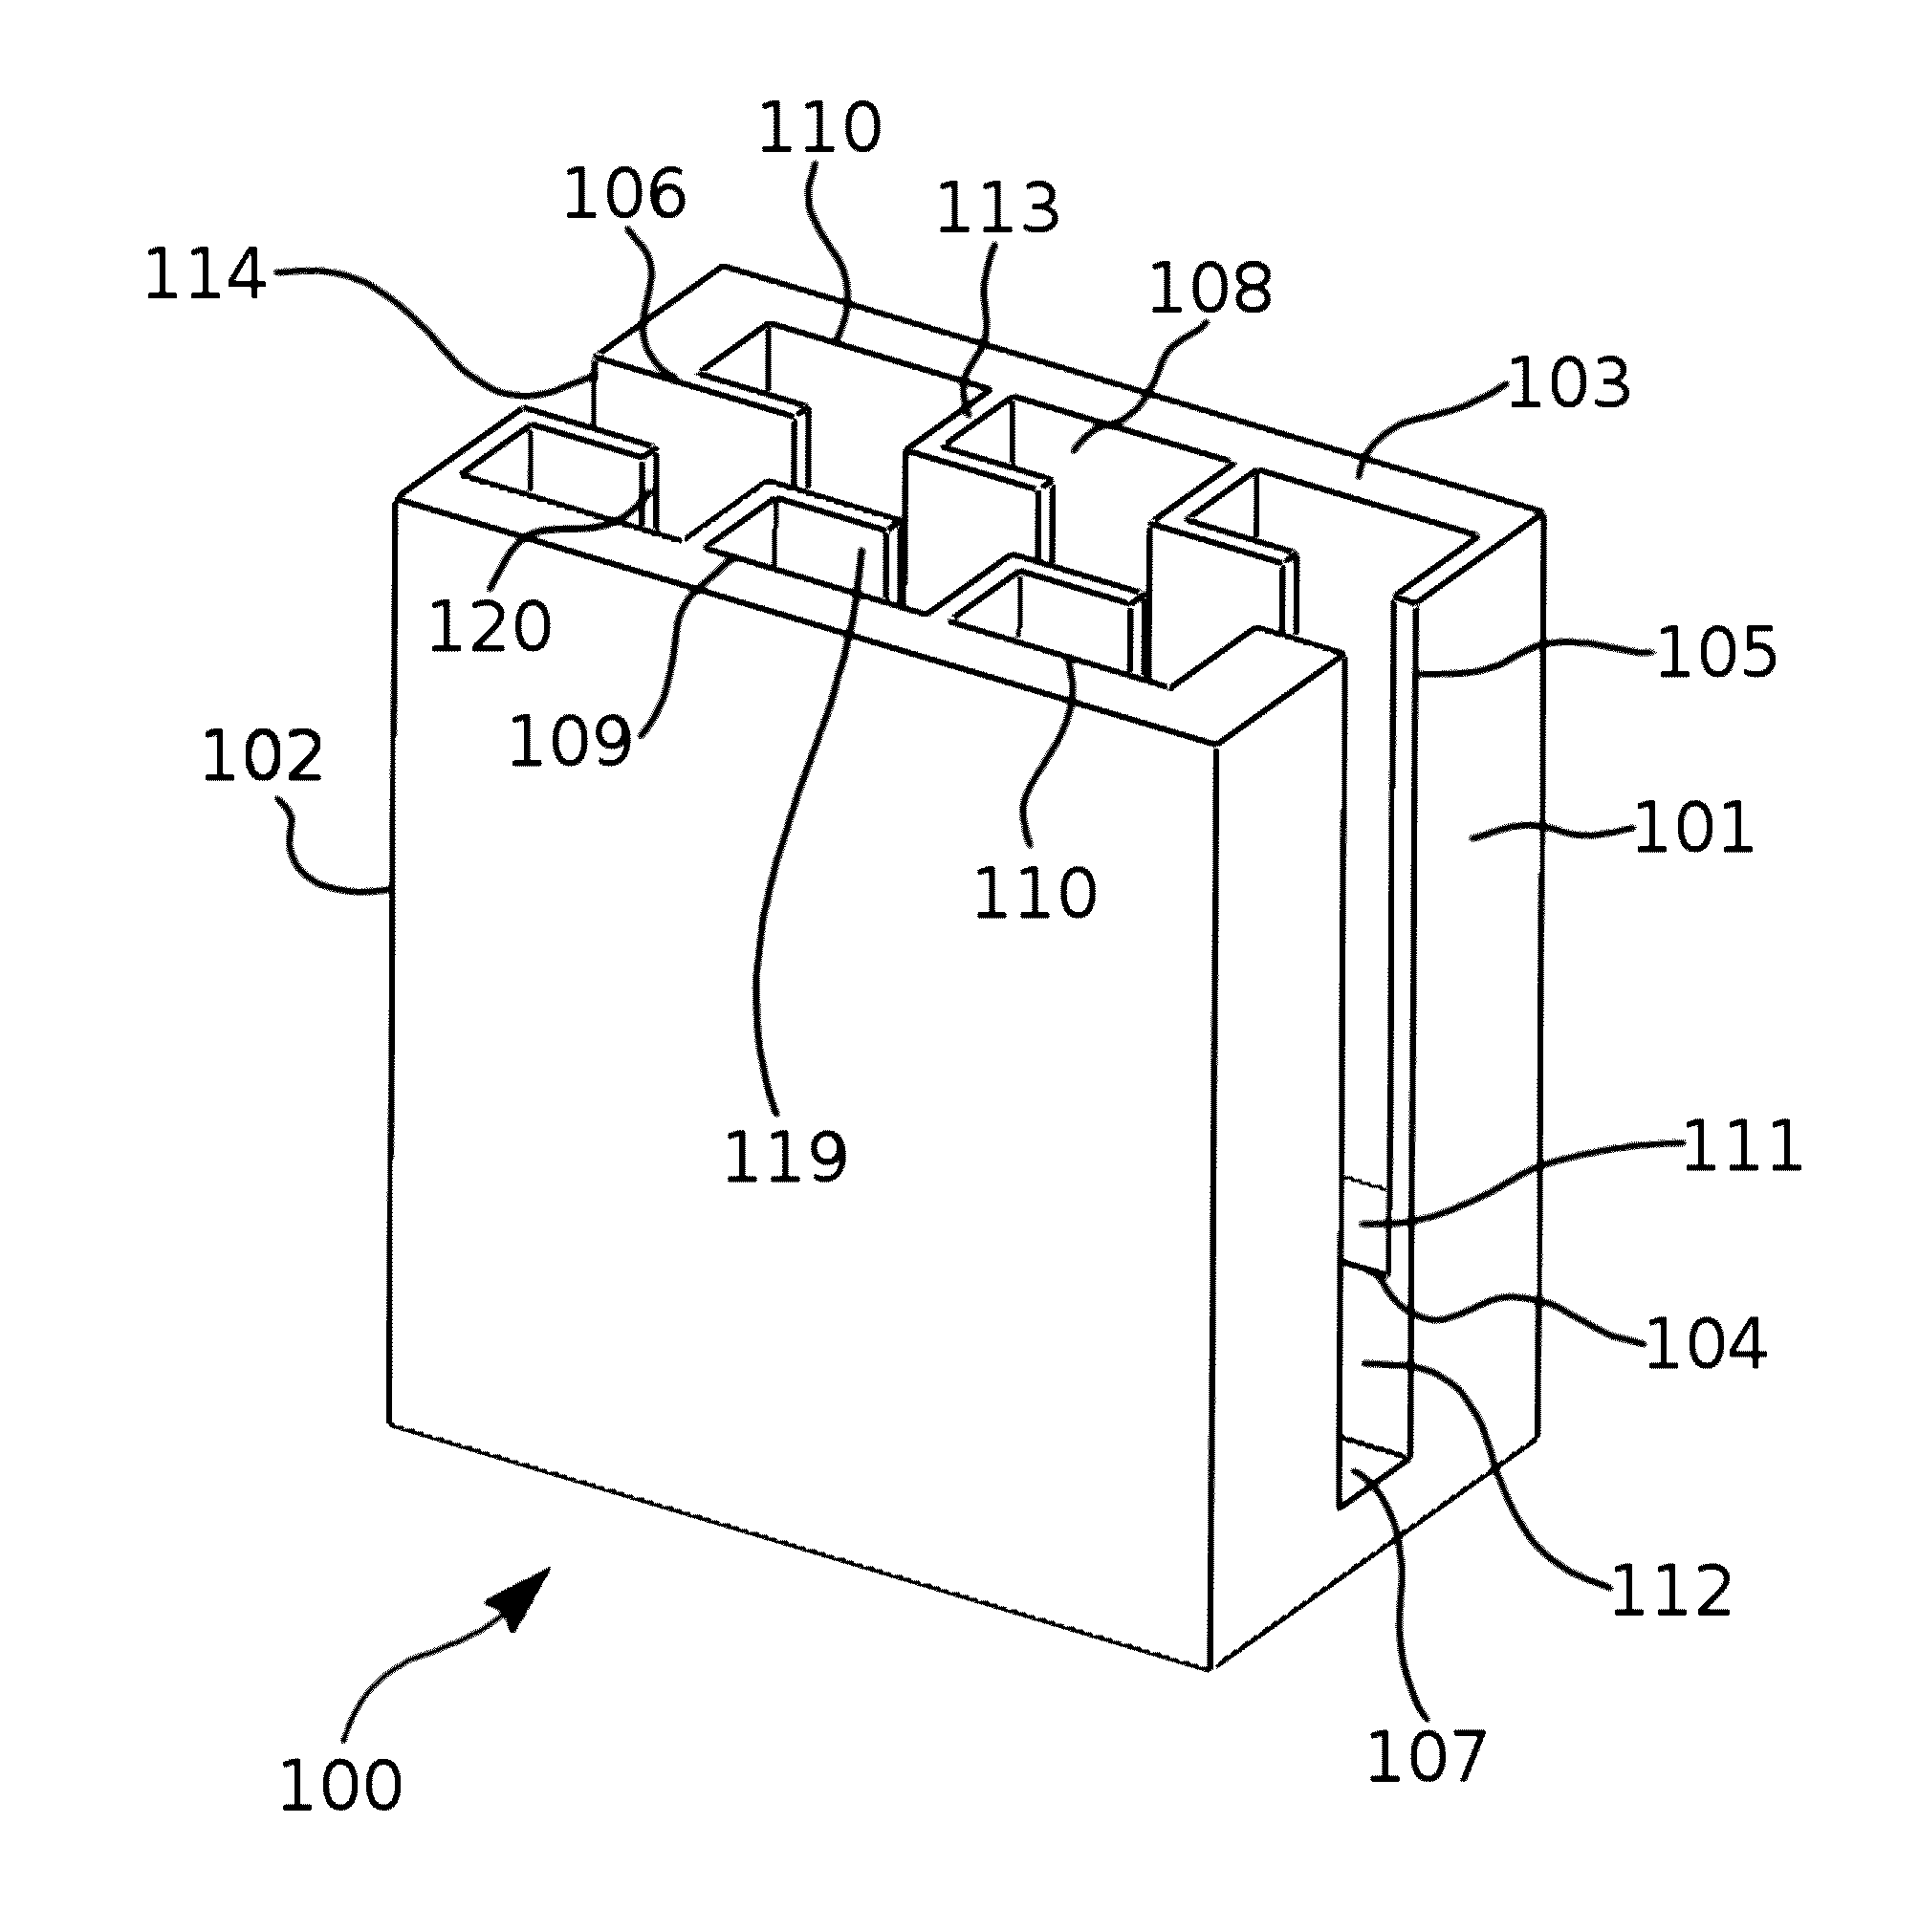 Apparatus for Storing and Loading Multiple Rows of Ammunition